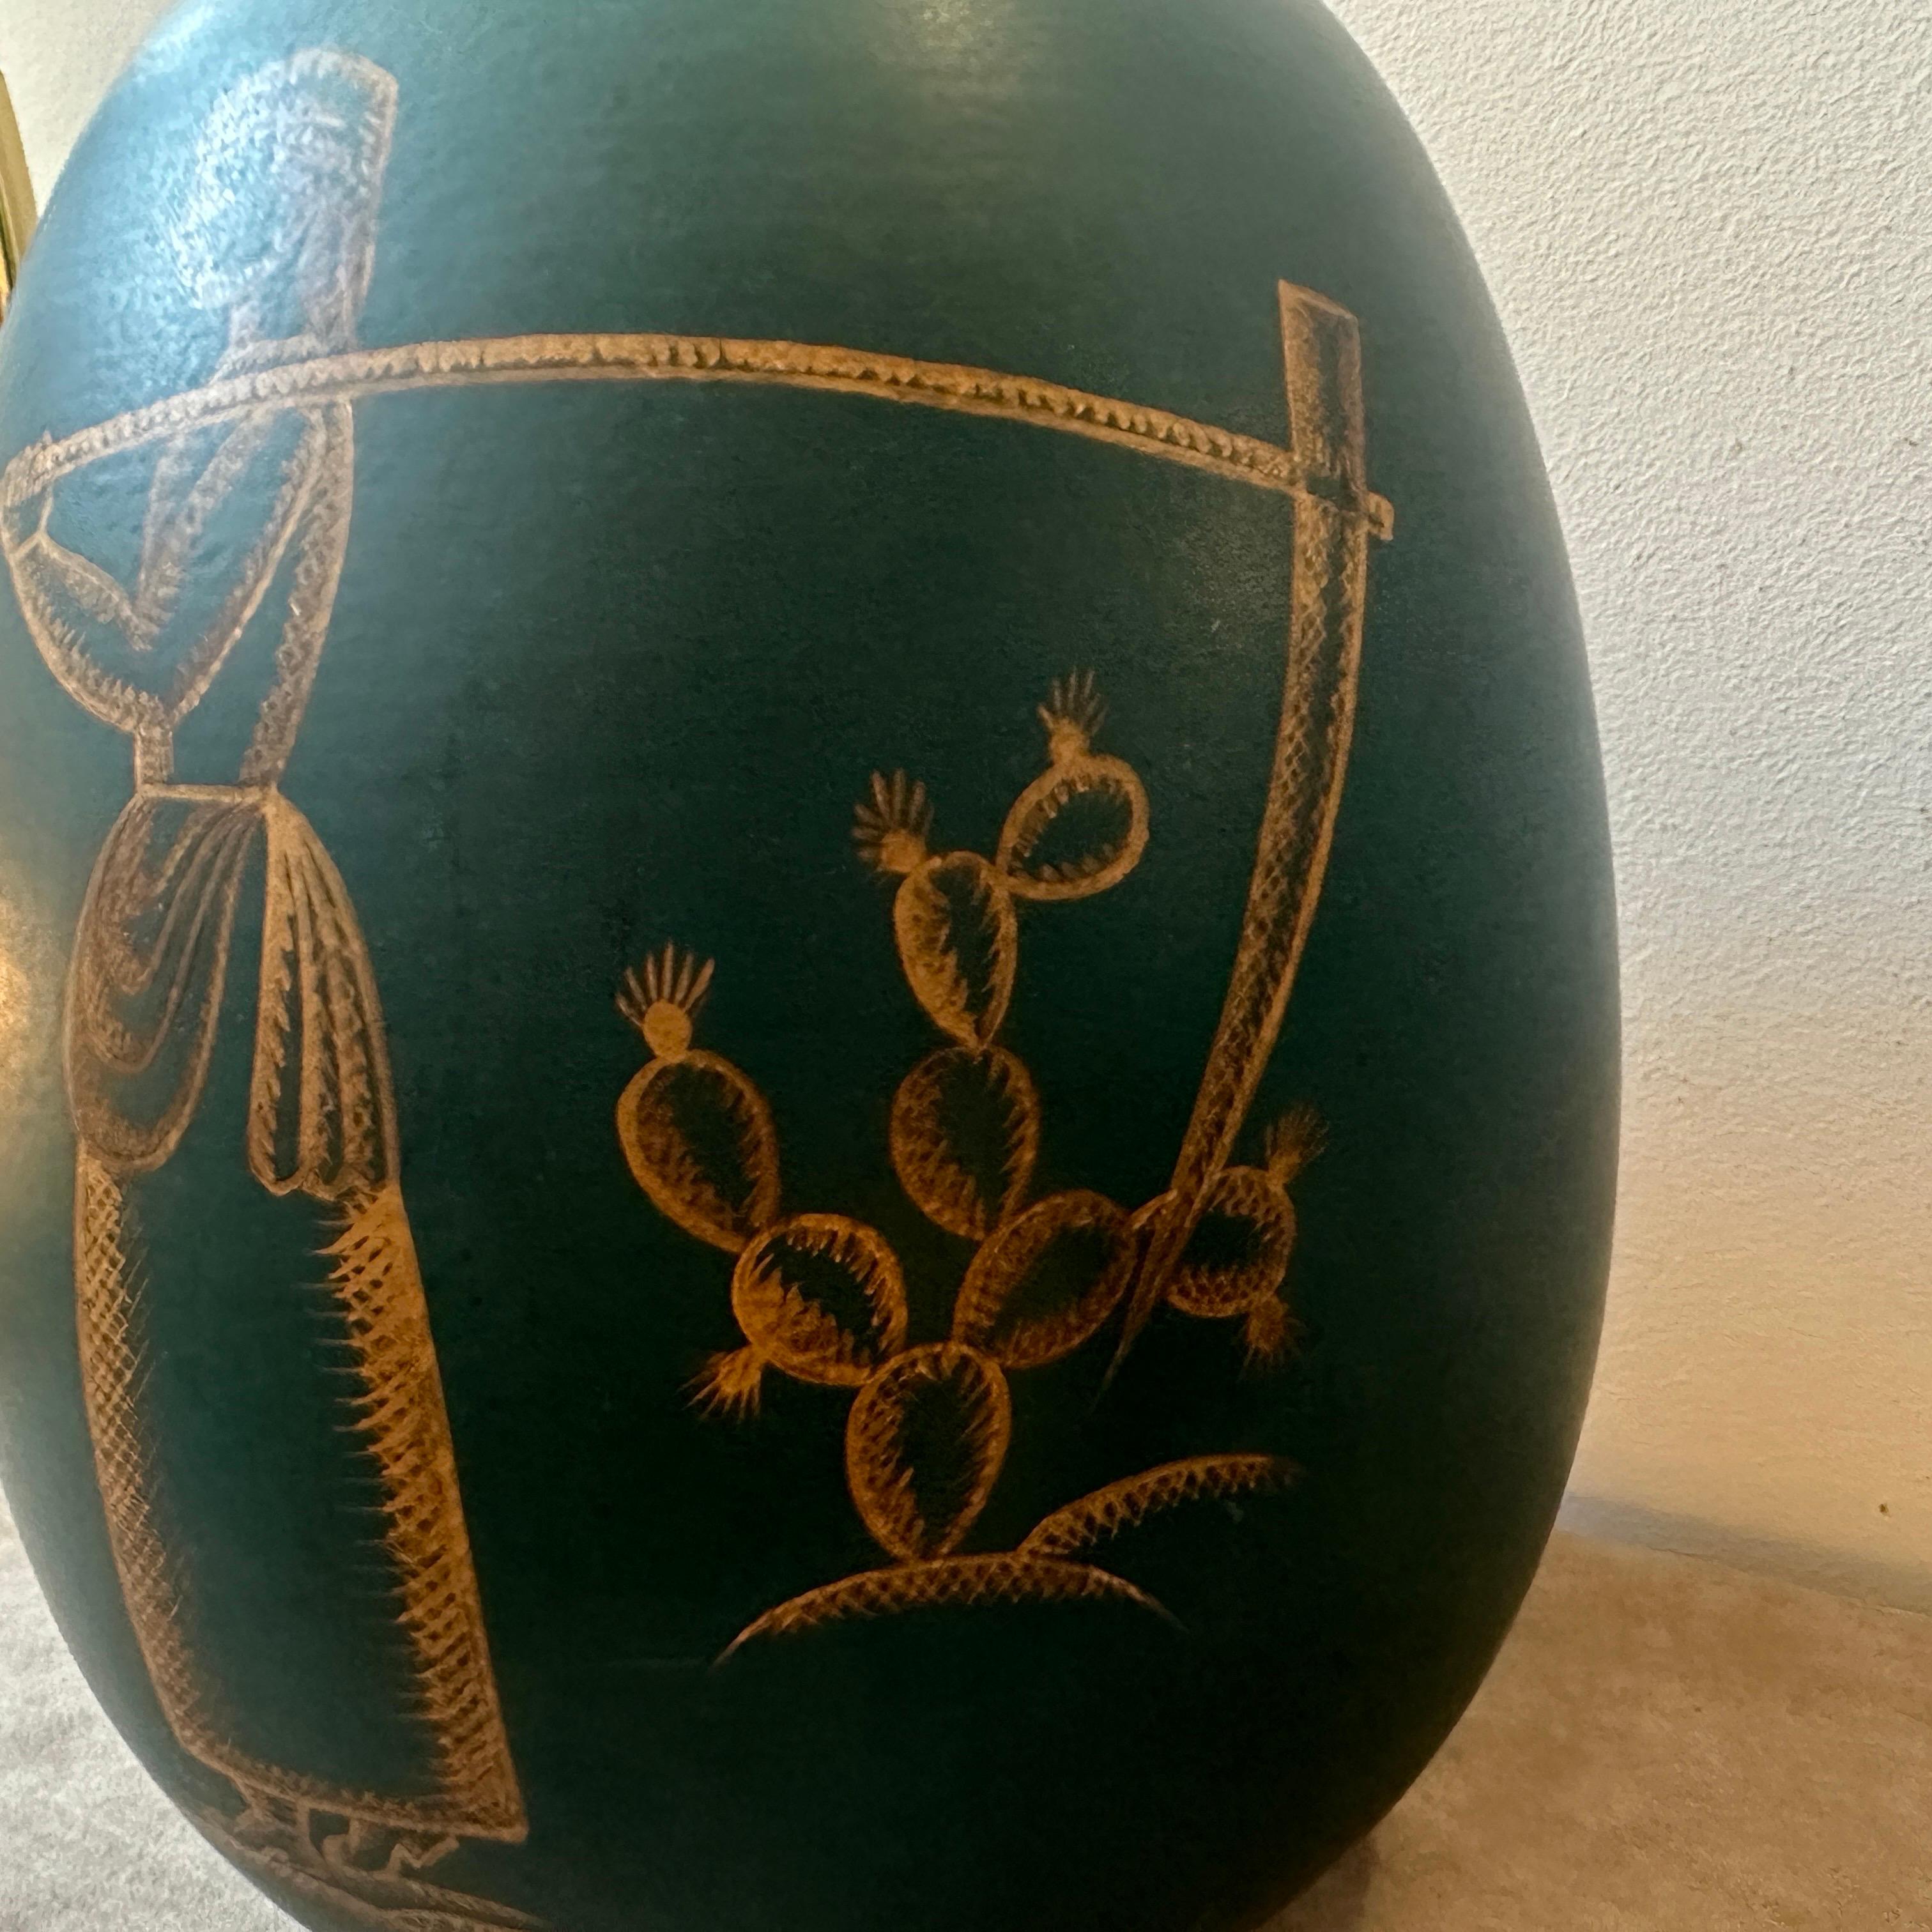 Terracotta A 1939 Dated Art Deco Gio Ponti Inspired Green and Gold Ceramic Sicilian Vase For Sale